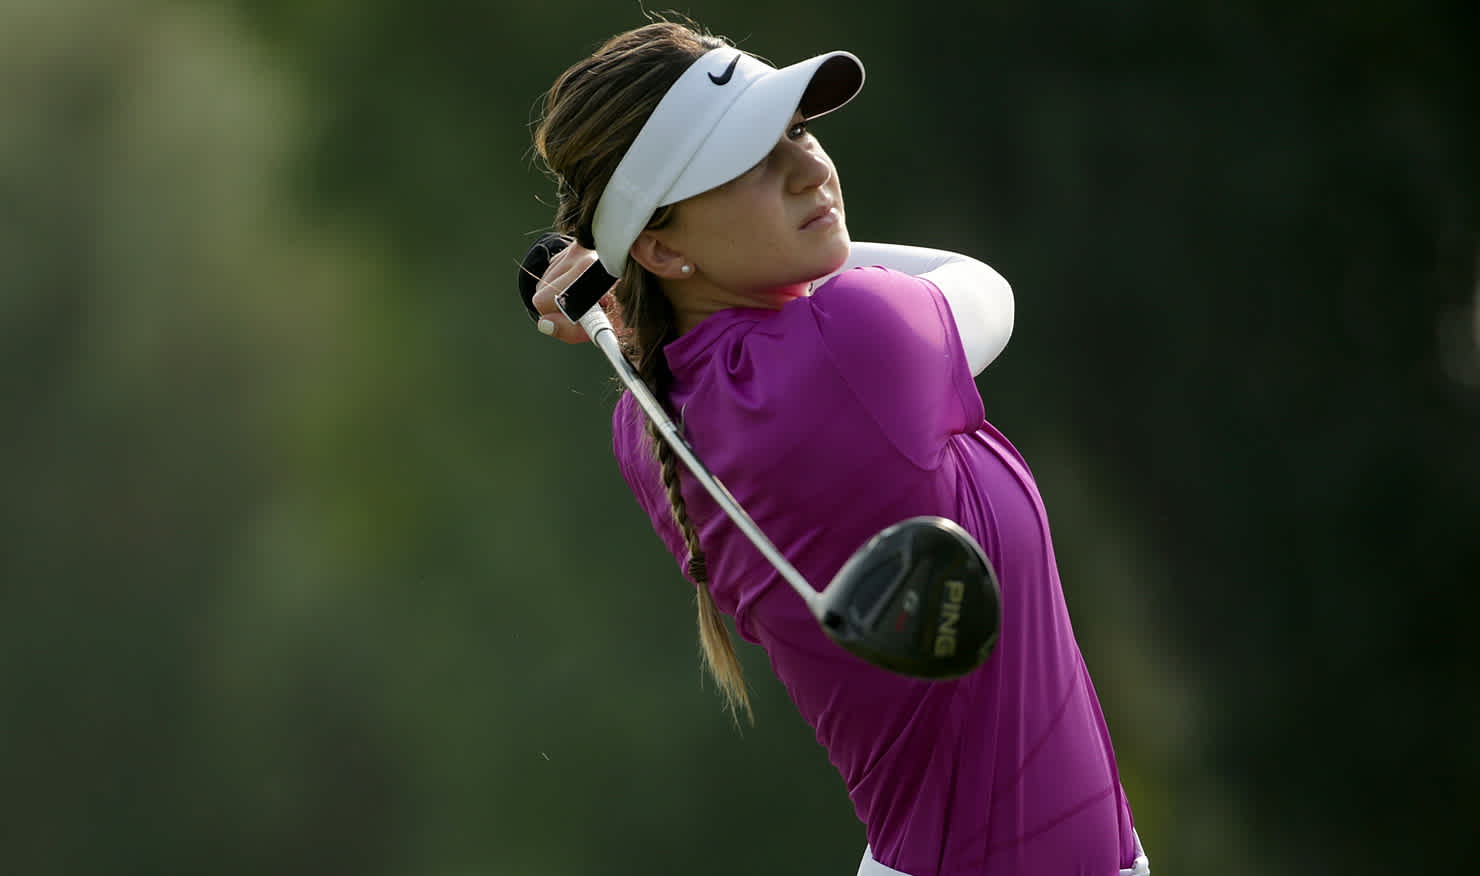 Gabi Ruffels has been a standout in both amateur and professional golf for the past two years.